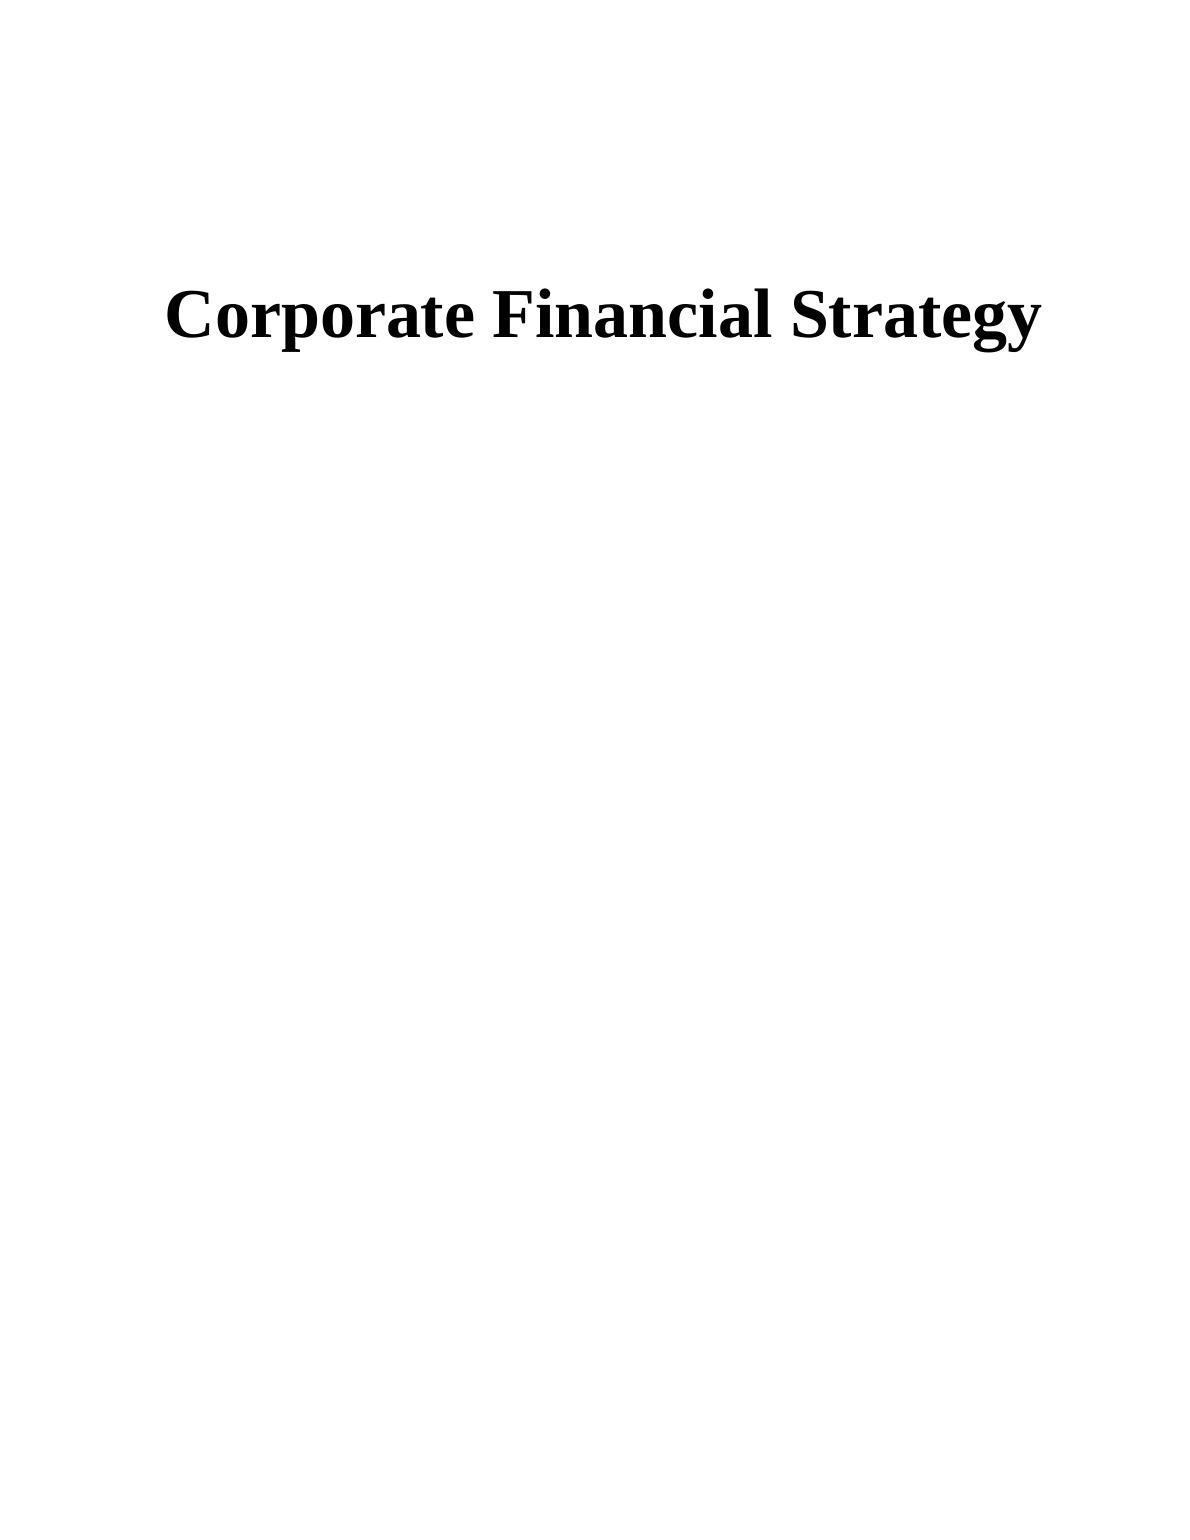 Corporate Financial Strategy Assignment - Tesco Plc_1